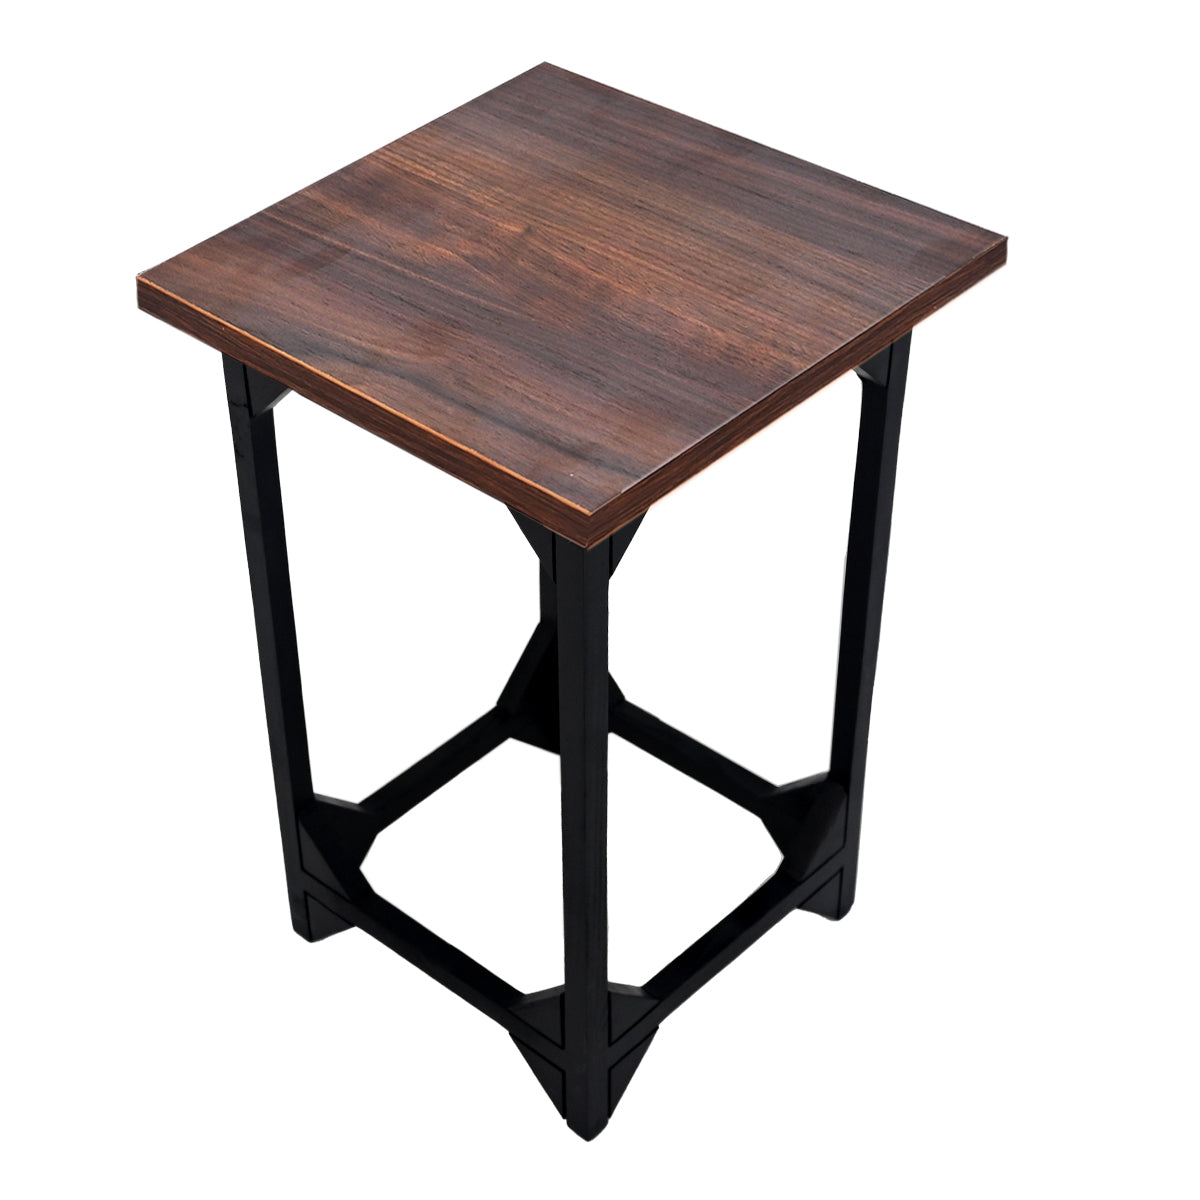 Ditmas Side Table (Black)